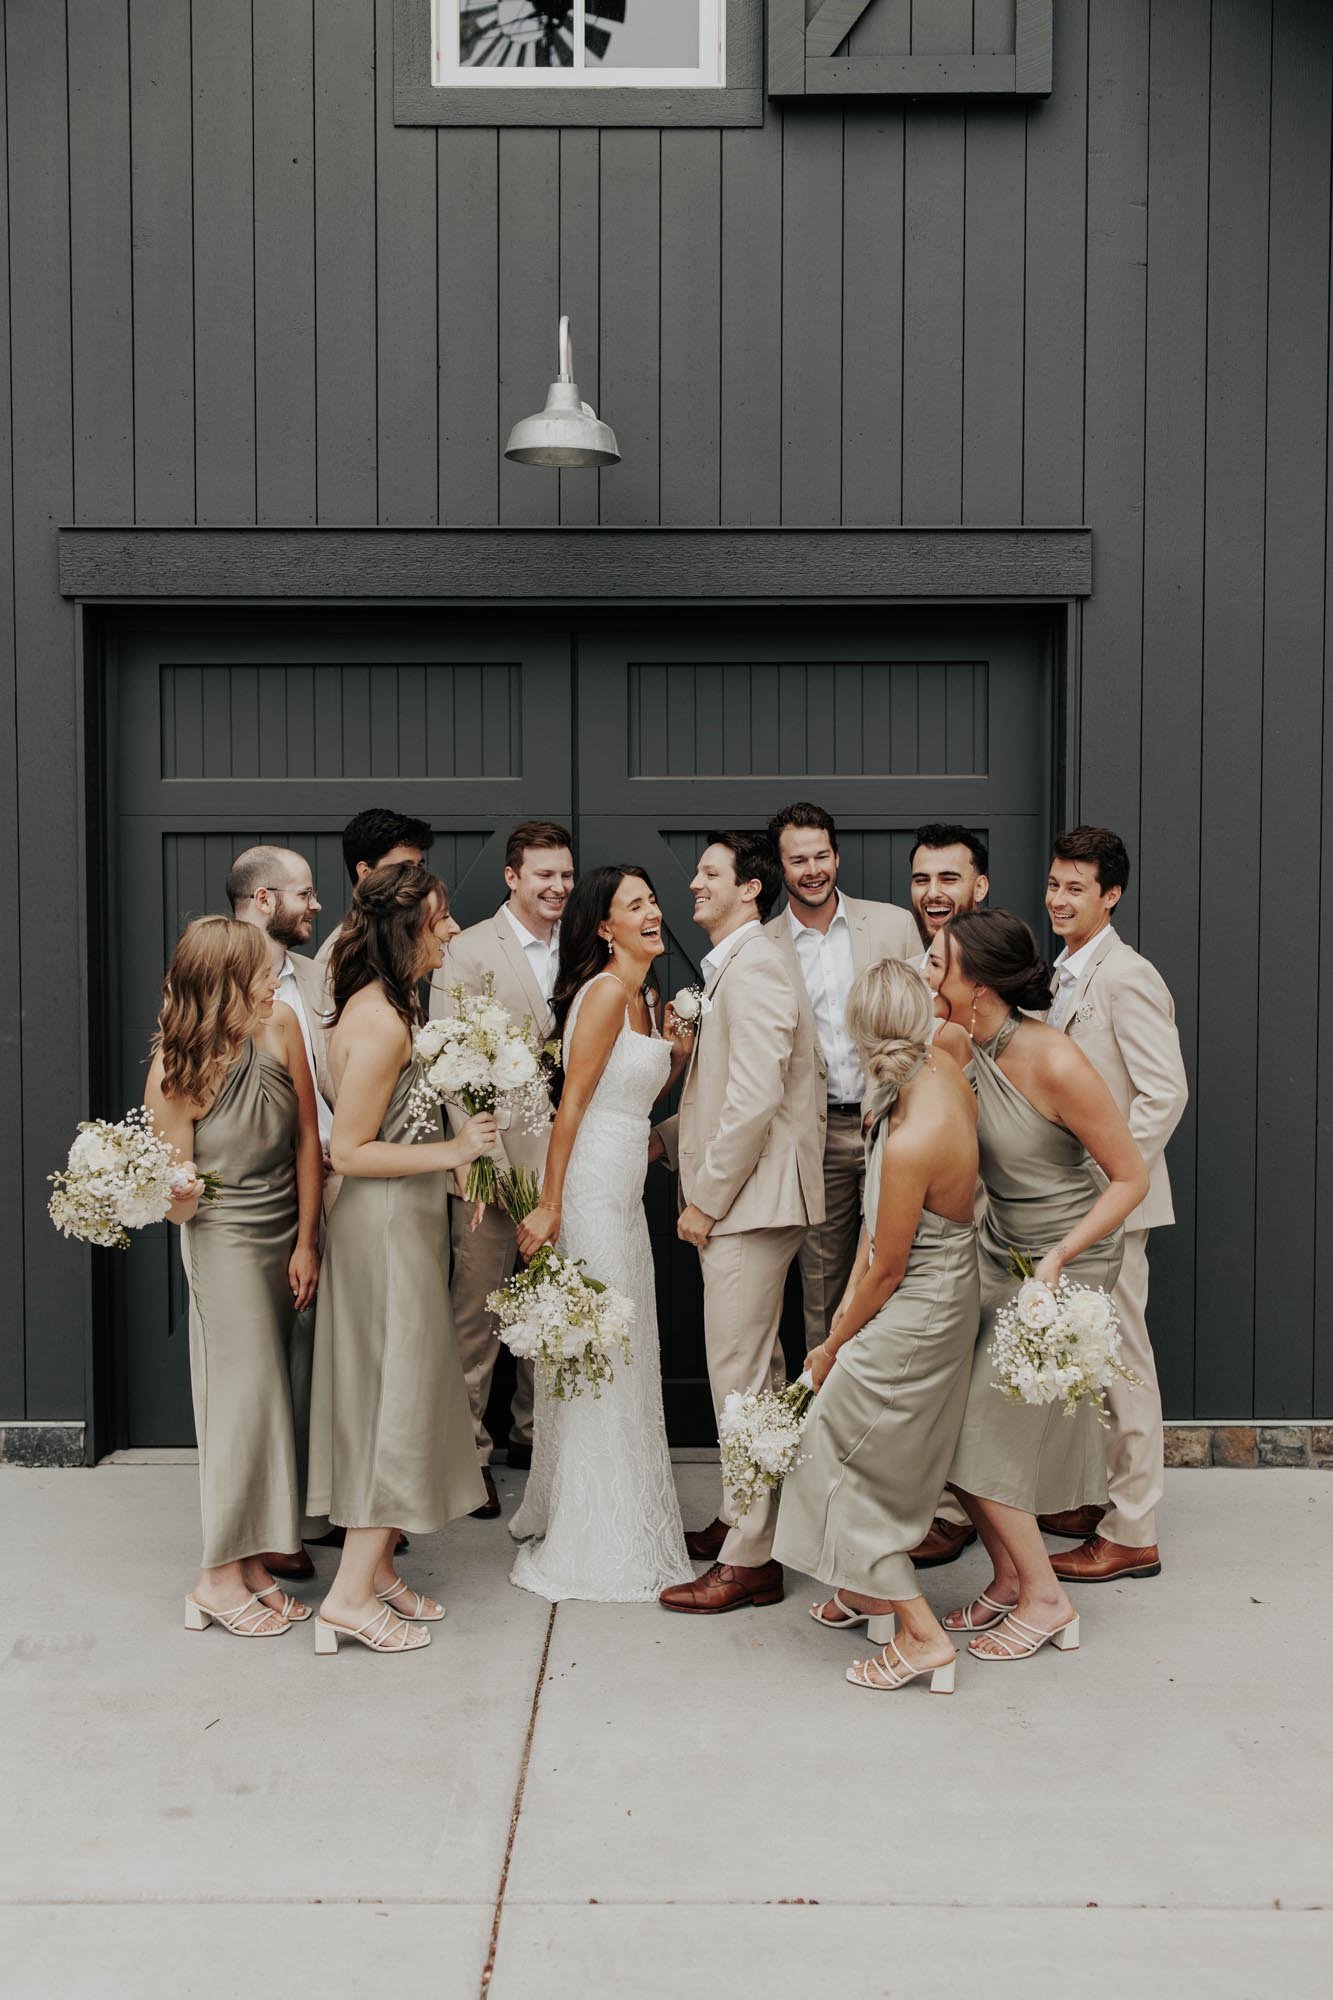  A wedding party laughing together before the ceremony. The bride is wearing a white beaded wedding dress, bridesmaids are in champagne satin midi dresses, and the groom and groomsmen are in tan suits.  